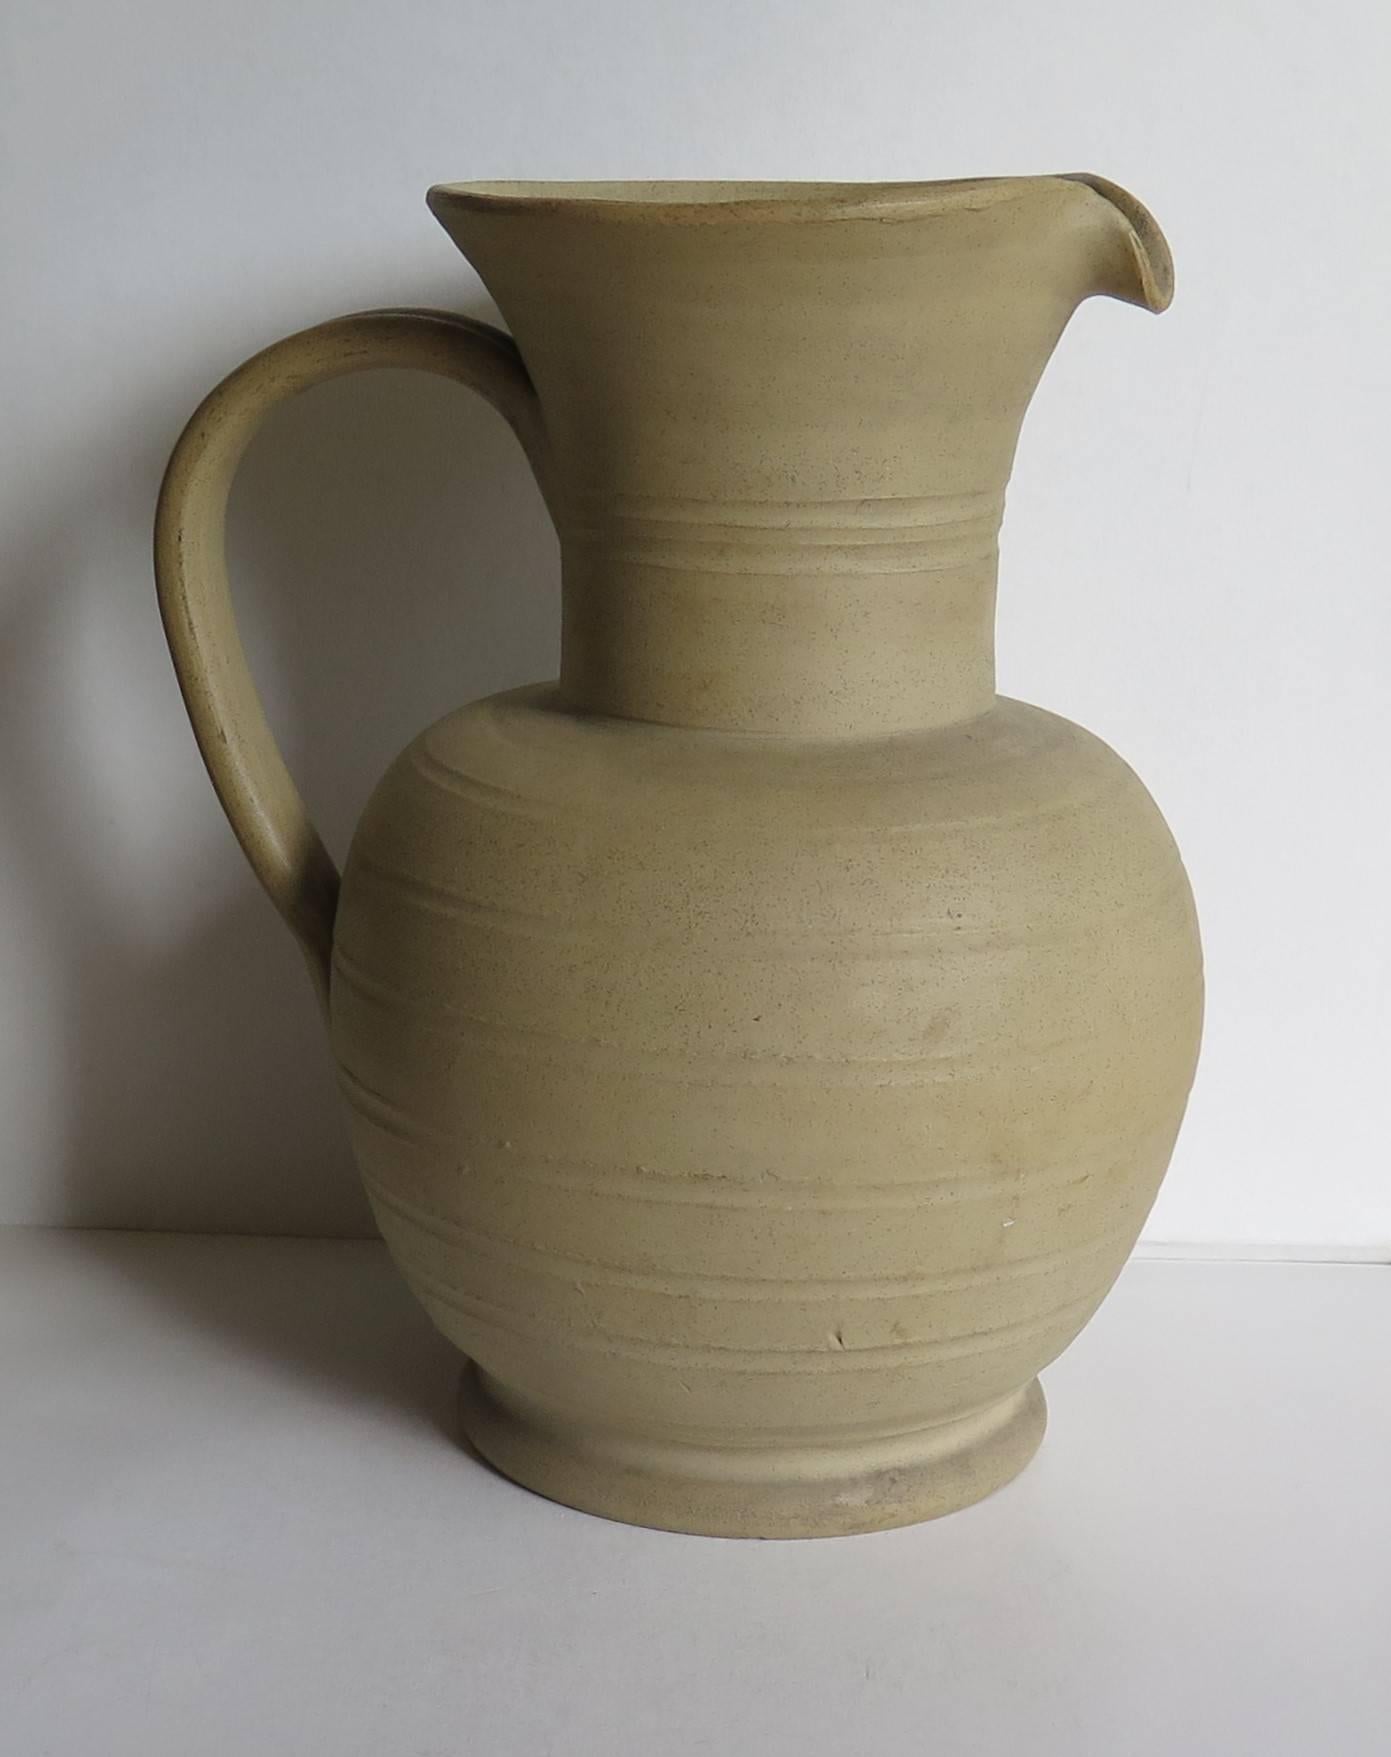 This large stoneware jug was manufactured by the Moira Pottery Company, near Burton on Trent, Leicestershire in England. The Moira Pottery works was founded in 1922 and demolished in the 1970s.

This hand potted stoneware jug or pitcher has a